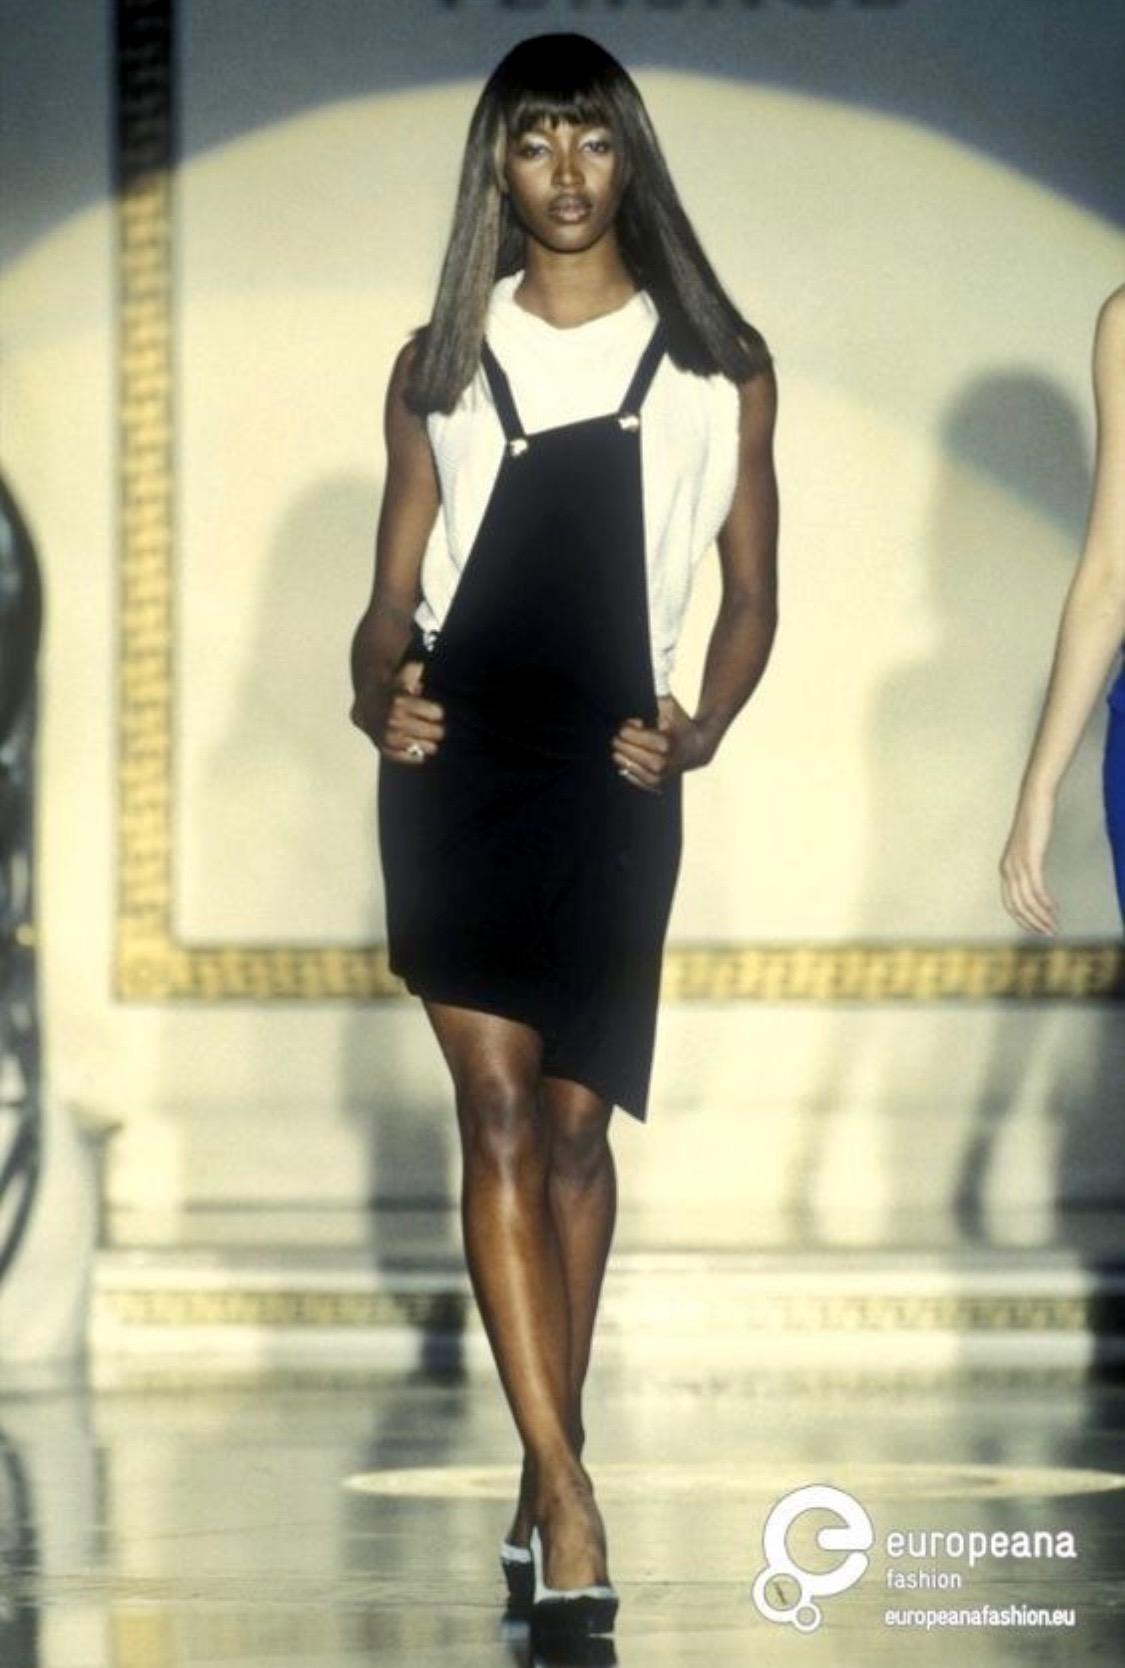 Presenting a beautiful backless overall Gianni Versace Couture clip dress, designed by Gianni Versace. From the Spring/Summer 1994 collection, this piece did not appear on the ready to wear runway but had a nearly identical piece shown on the